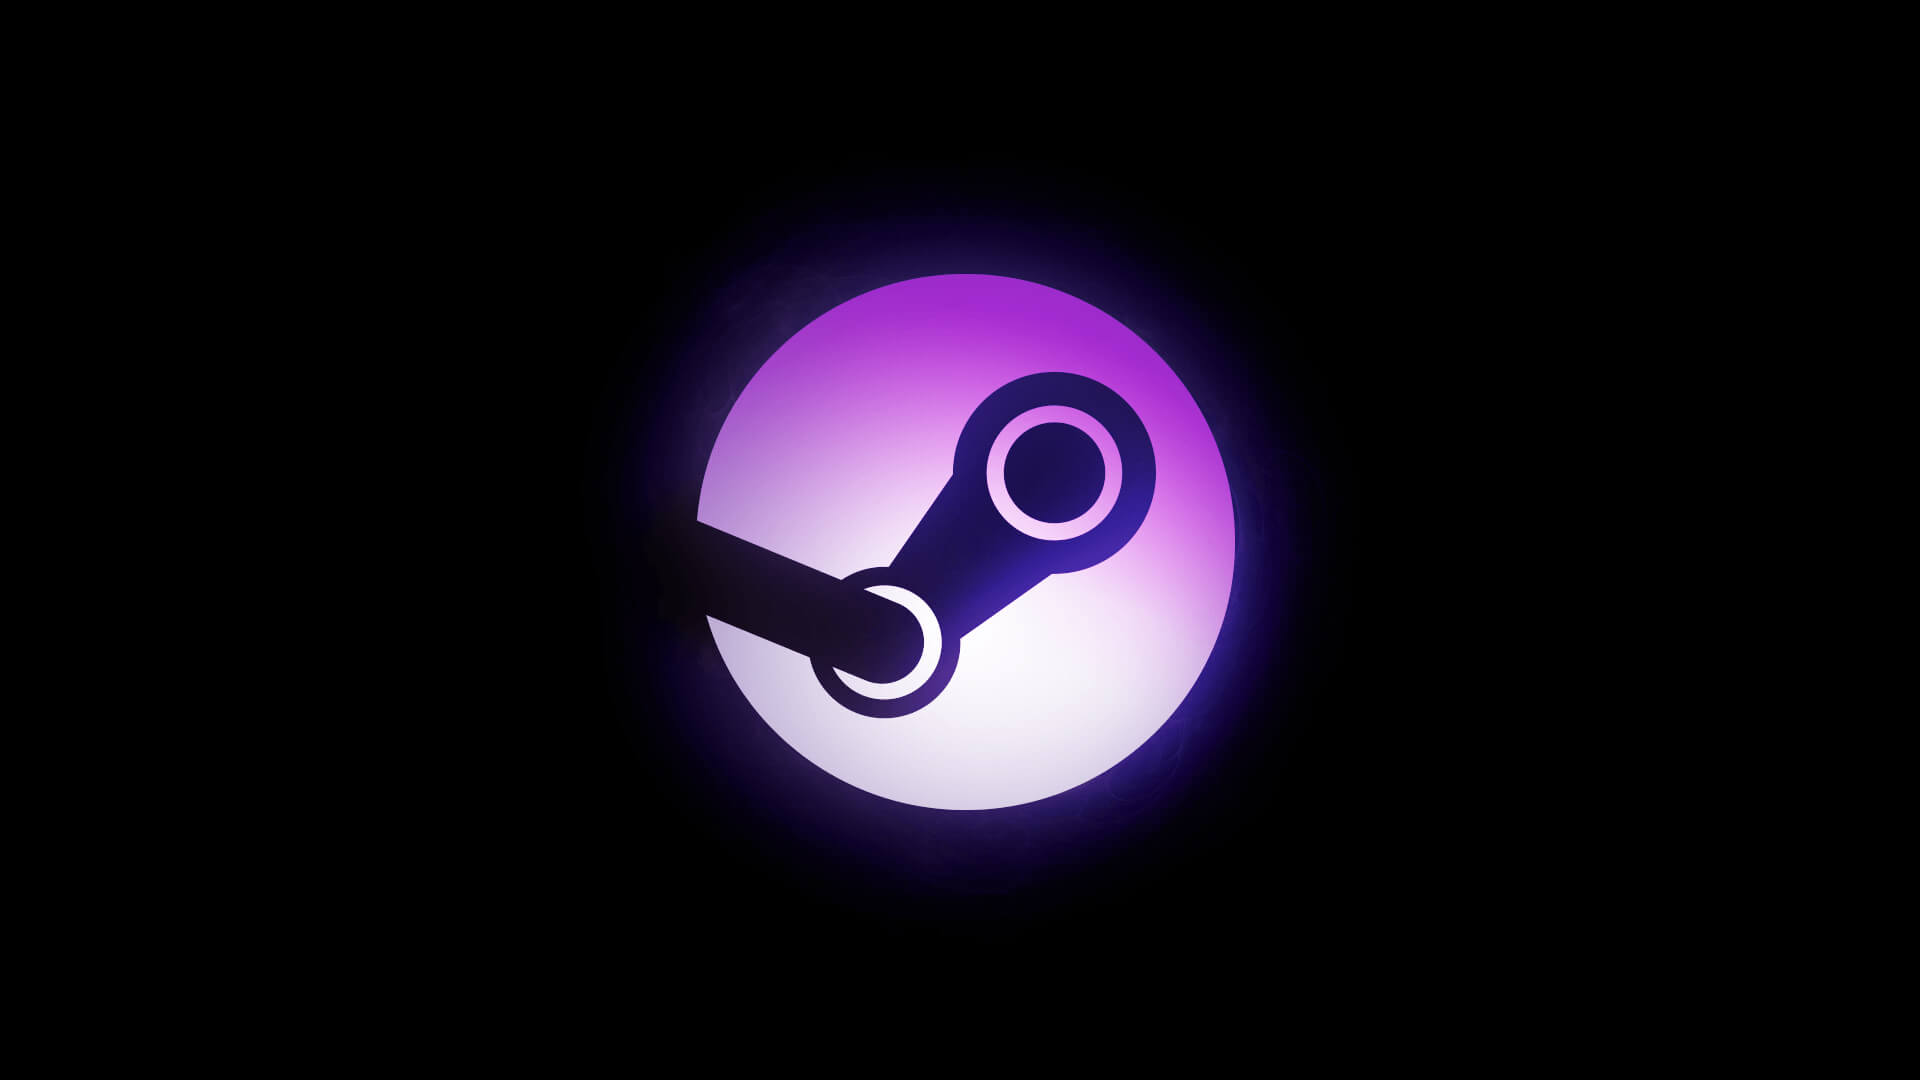 Download and Install Steam on ChromeOS